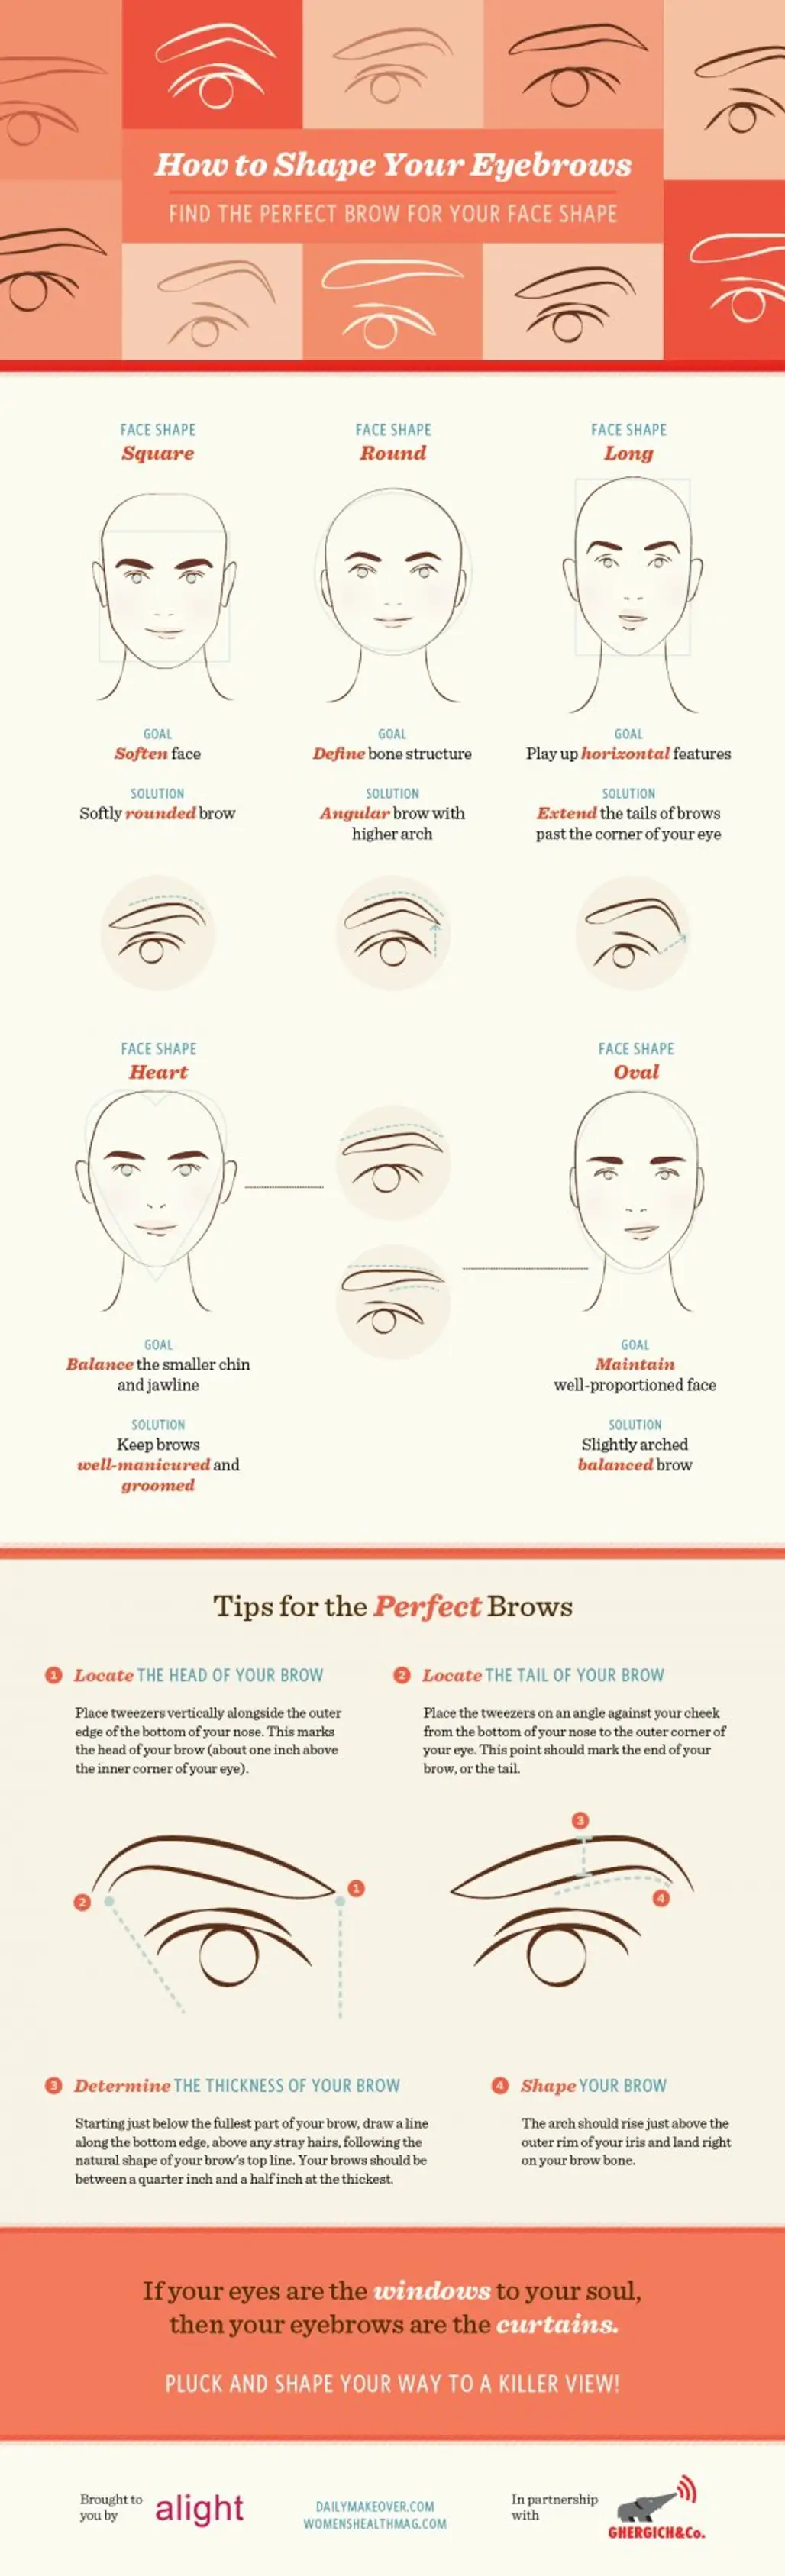 How to Shape Your Eyebrows for Your Face Shape